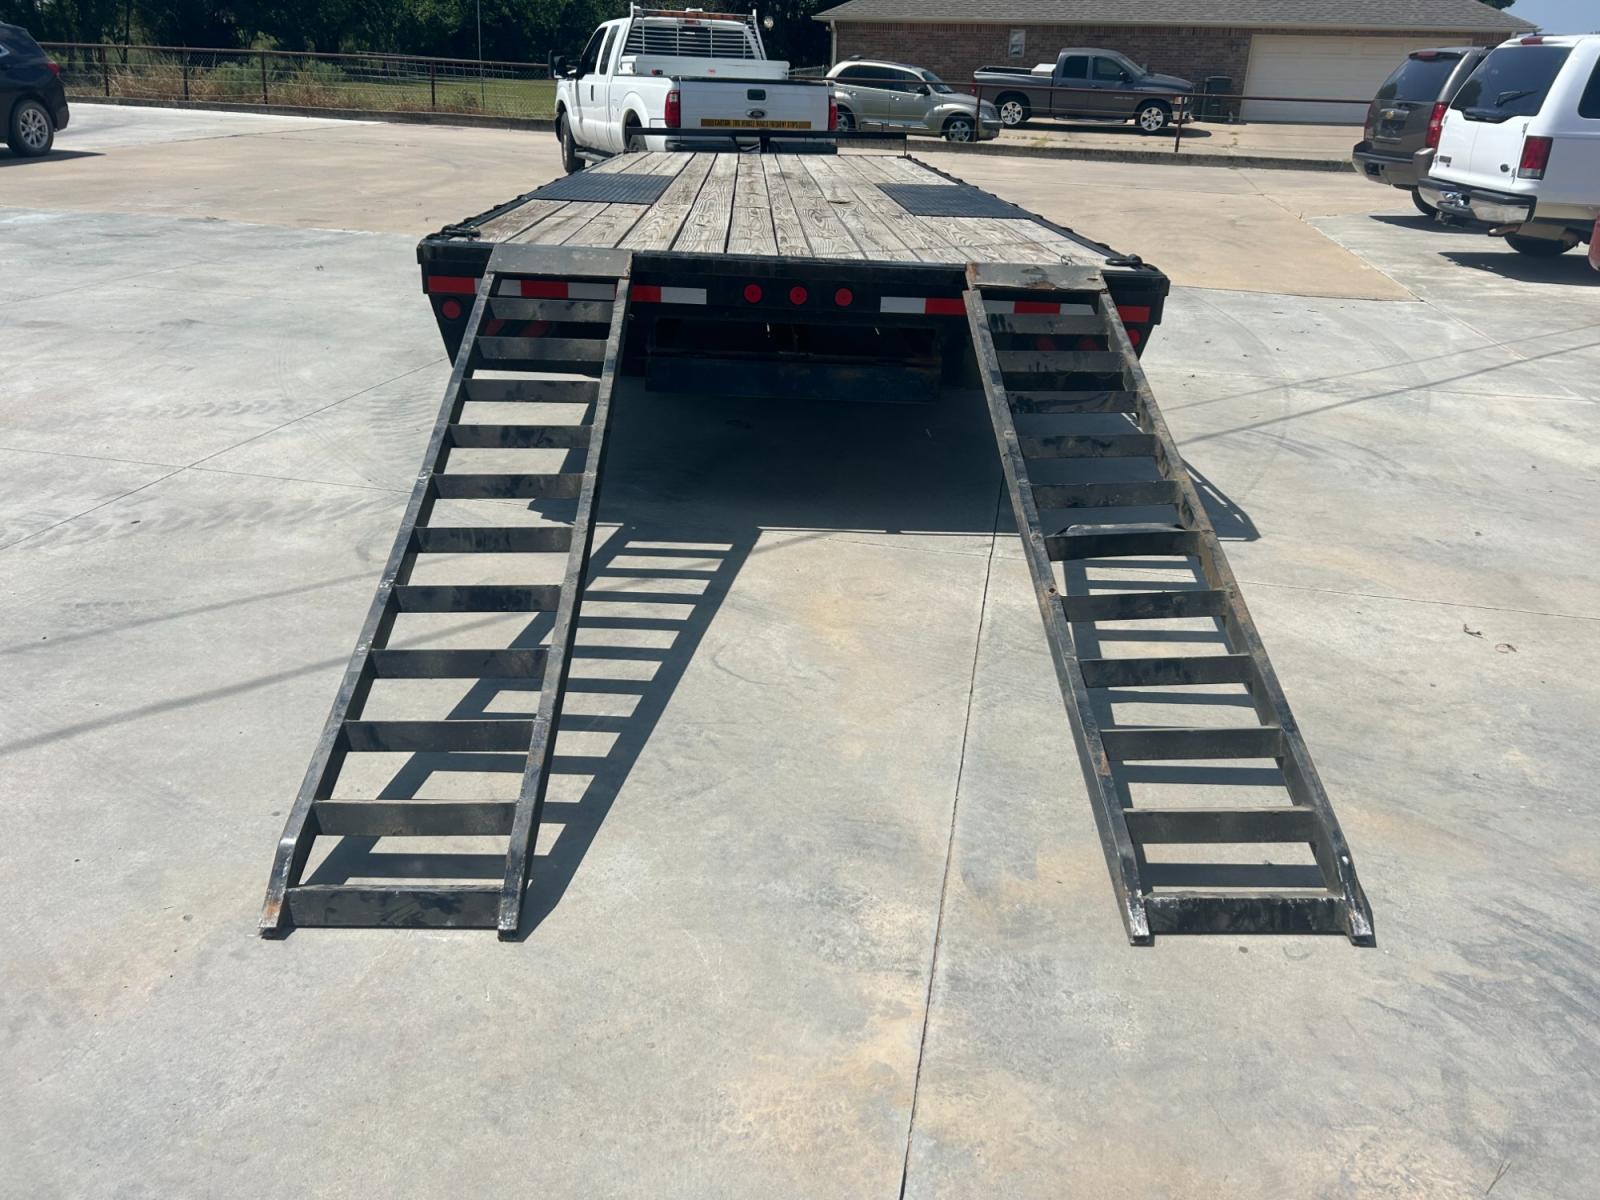 2022 BLACK Norstar Trailers IRONBULL (50HFP2426N1) , located at 17760 Hwy 62, Morris, OK, 74445, 35.609104, -95.877060 - 2022 IRONBULL TRAILER FEATURES 10" I-BEAM FRAME AND TONGUE, 2 5/16'' ADJUSTABLE COUPLER, 3'' STRUCTURAL CROSSMEMBERS, DECK HEIGHT 33'', RUB RAIL, STAKE POCKETS, PIPE SPOOLS, CAMBERED SPRING AXLES, MULTI-LEAF SLIPPER SPRING SUSPENSION, E-Z LUBE HUBS, 2 ELECTRIC BREAK AXLES, FULL 93' WIDE DECKOVER, 8 - Photo #6